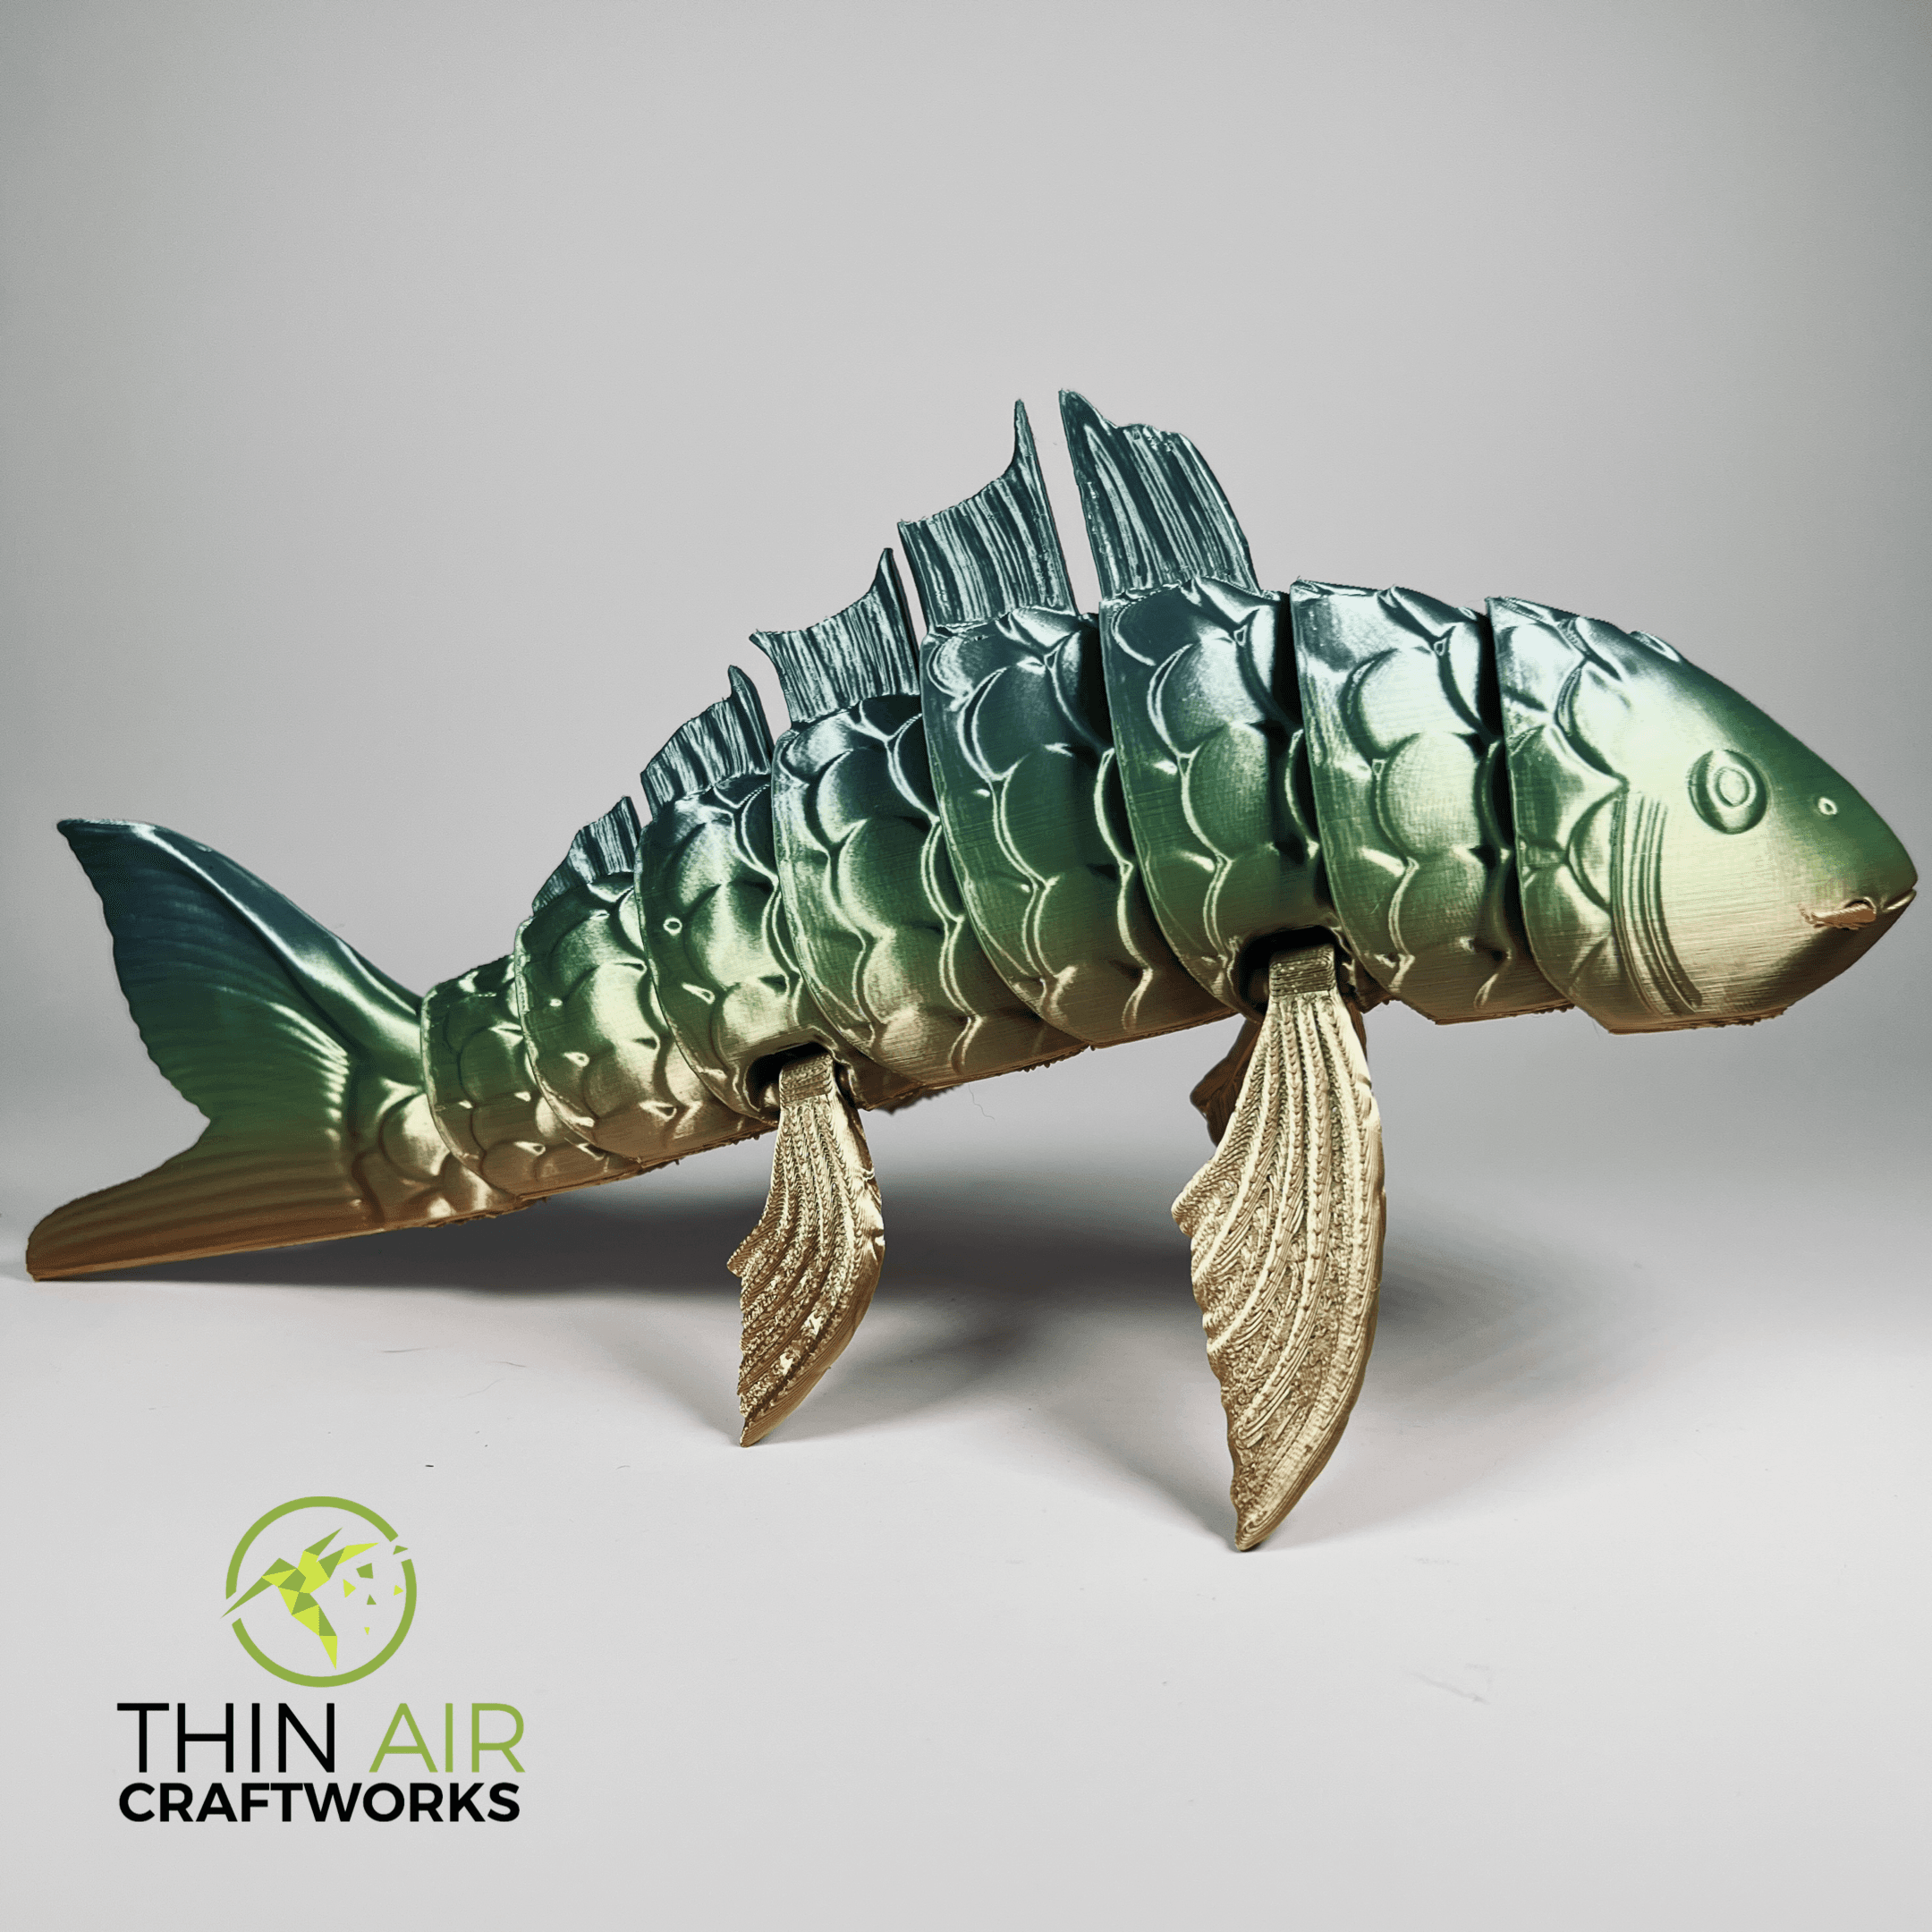 Articulating Koi Fish - Koi Fish Fidget, Flexible Print in Place (No Supports) 3d model